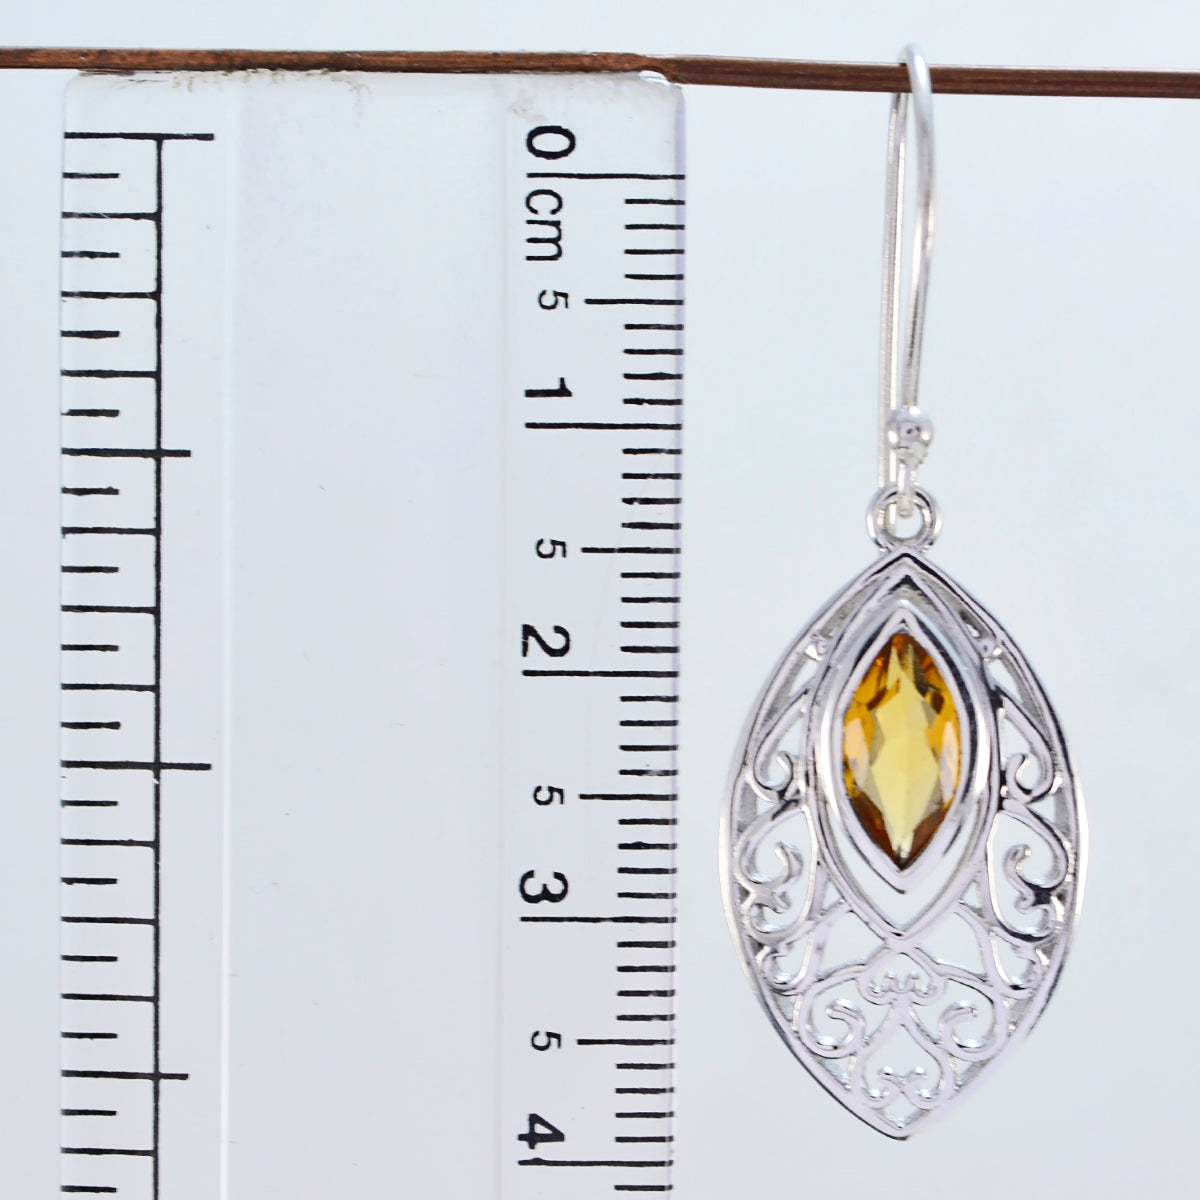 Riyo Good Gemstones Marquise Faceted Yellow Citrine Silver Earrings gift for anniversary day